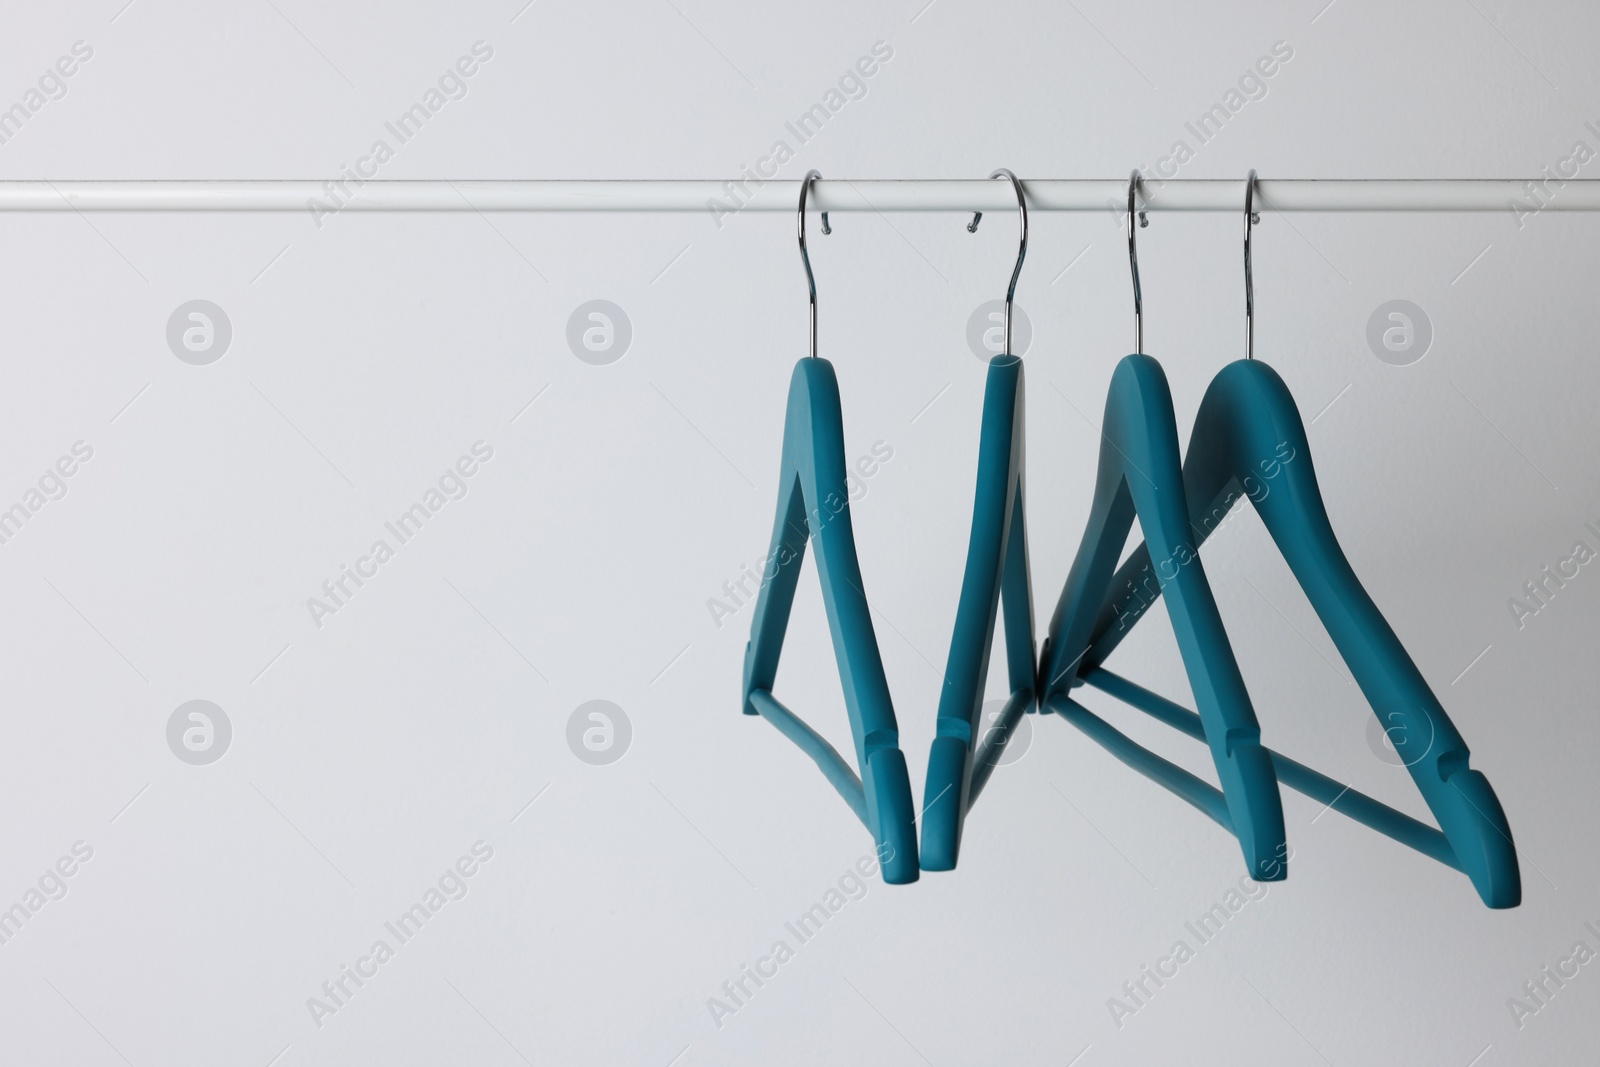 Photo of Blue clothes hangers on metal rail against light background. Space for text